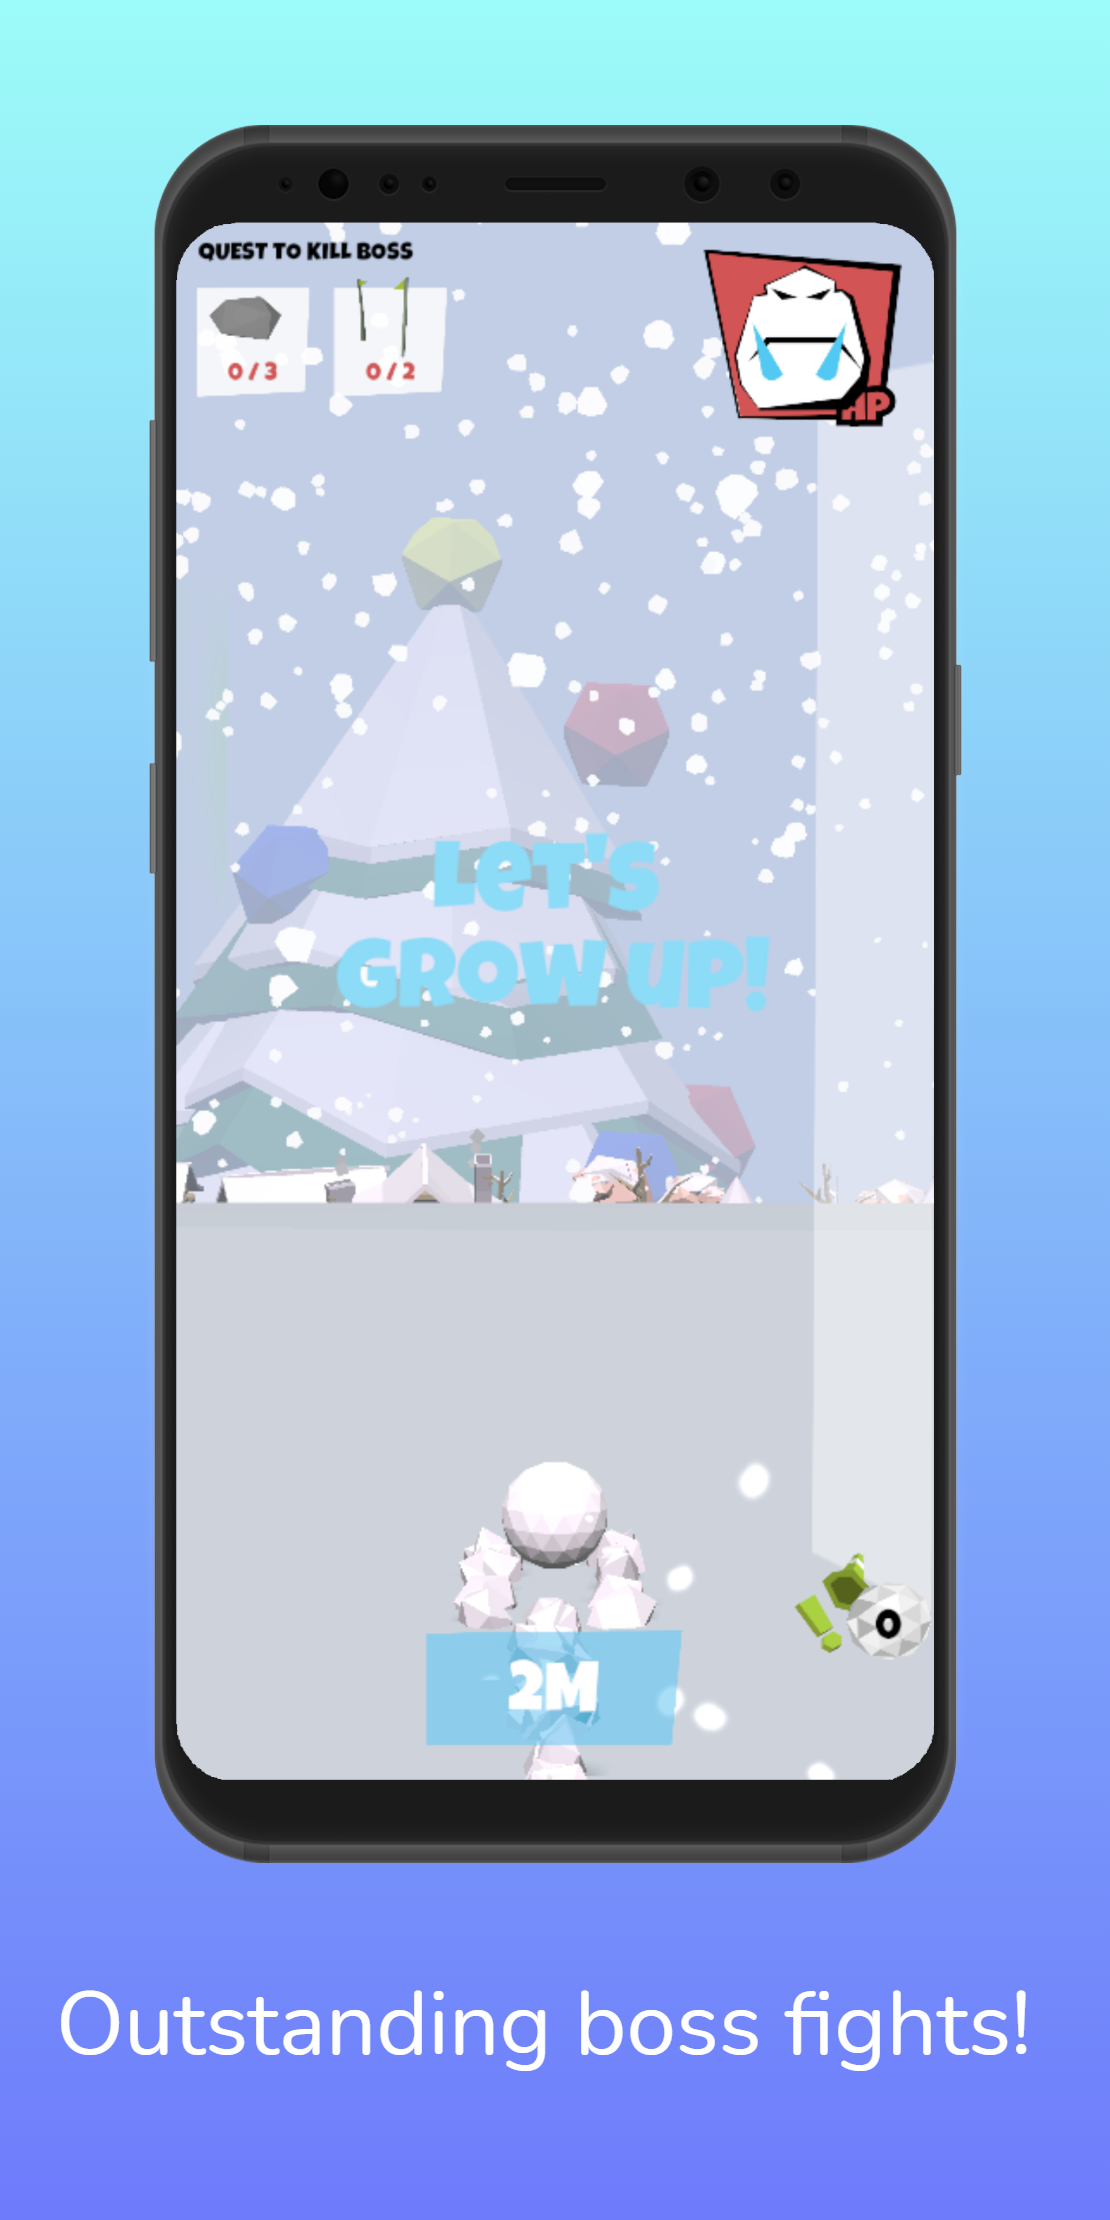 SnowBall - Free Winter Game